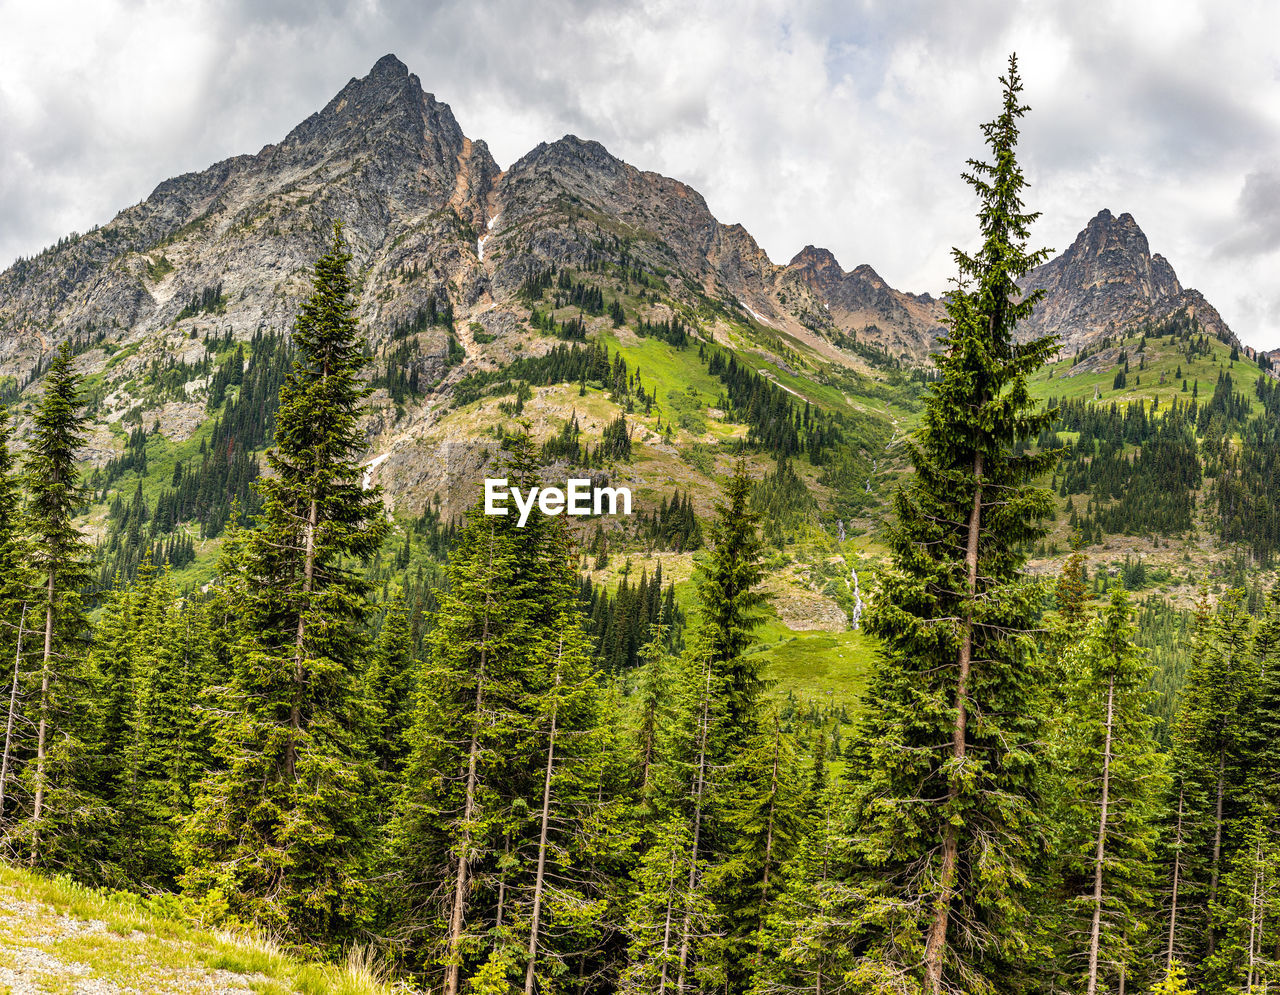 SCENIC VIEW OF PINE TREES AGAINST MOUNTAINS